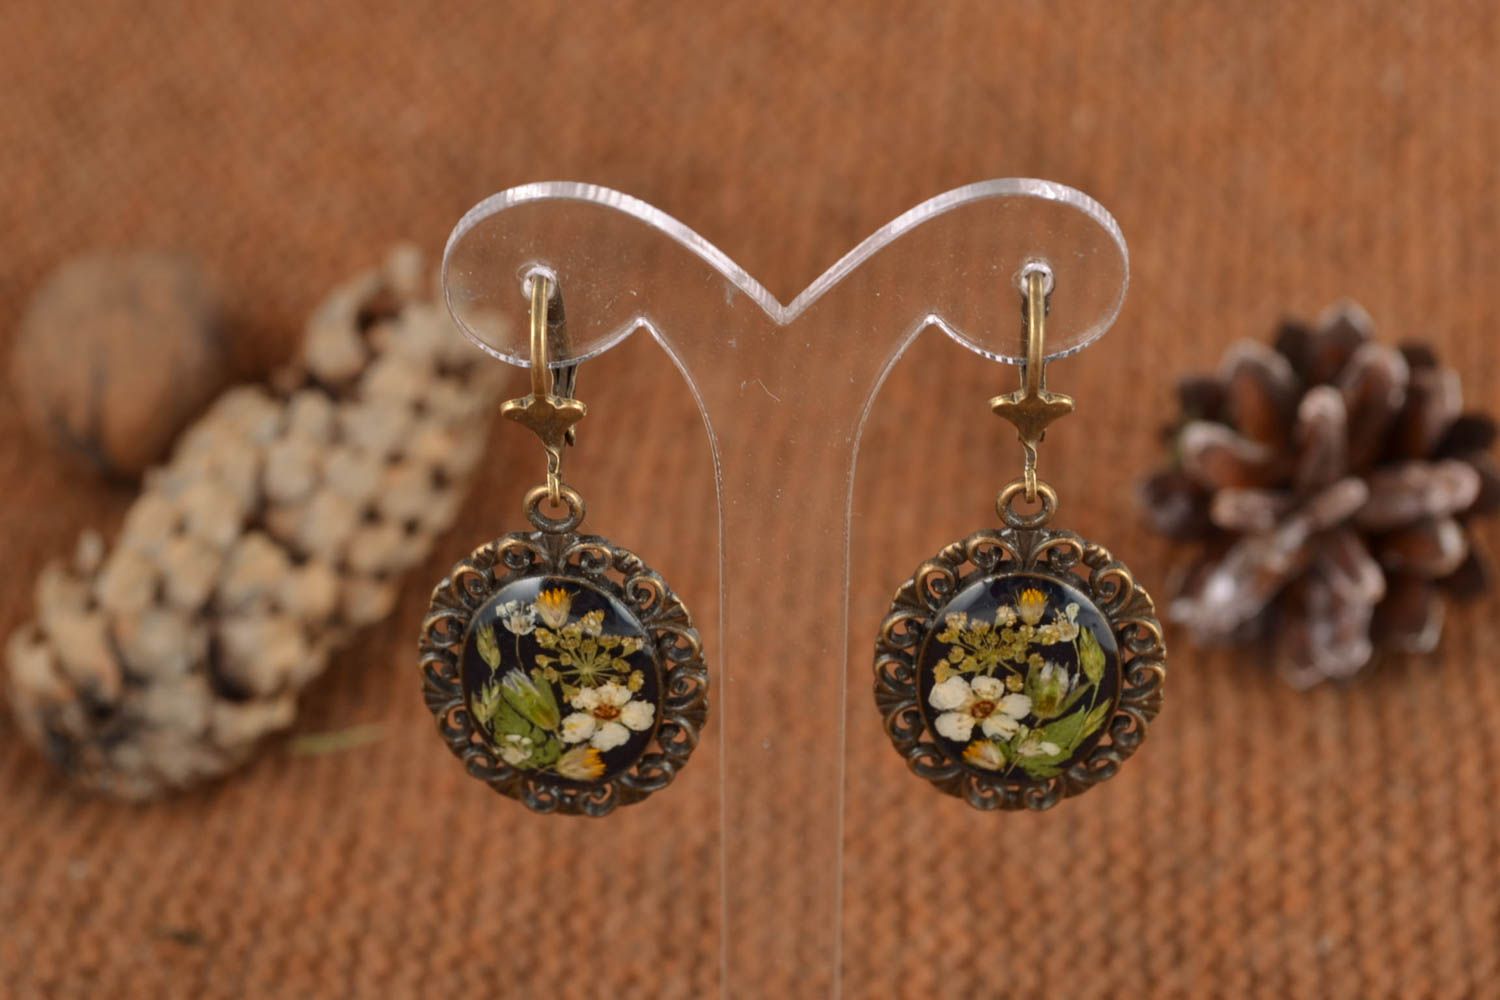 Vintage earrings with natural flowers in epoxy resin photo 1